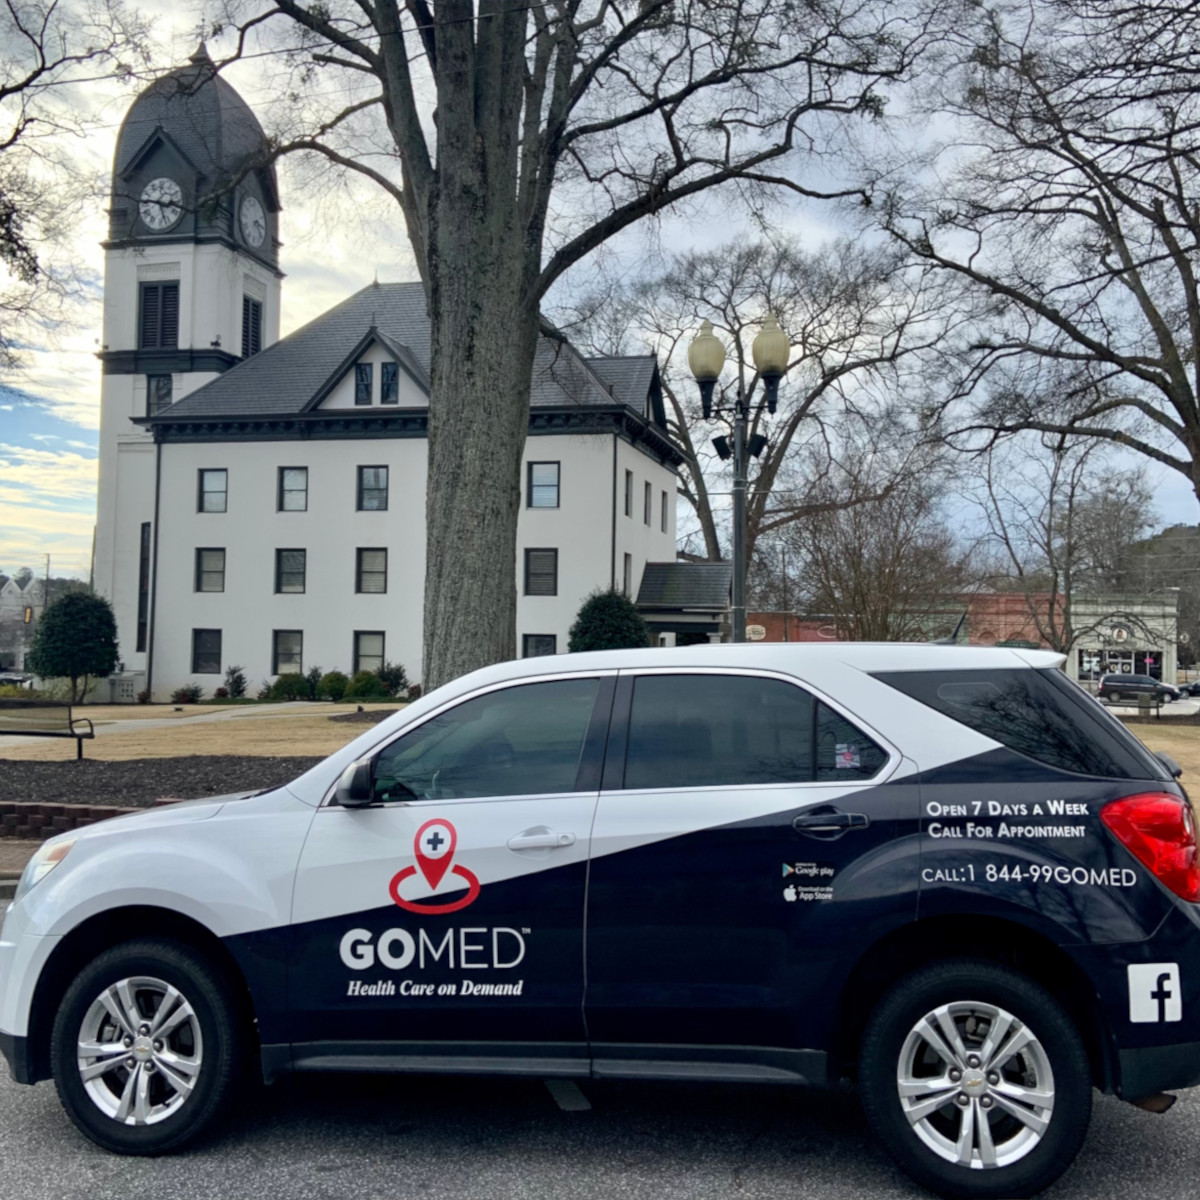 Emergency PCR Travel Covid-19 Testing Available In Fayetteville, Georgia